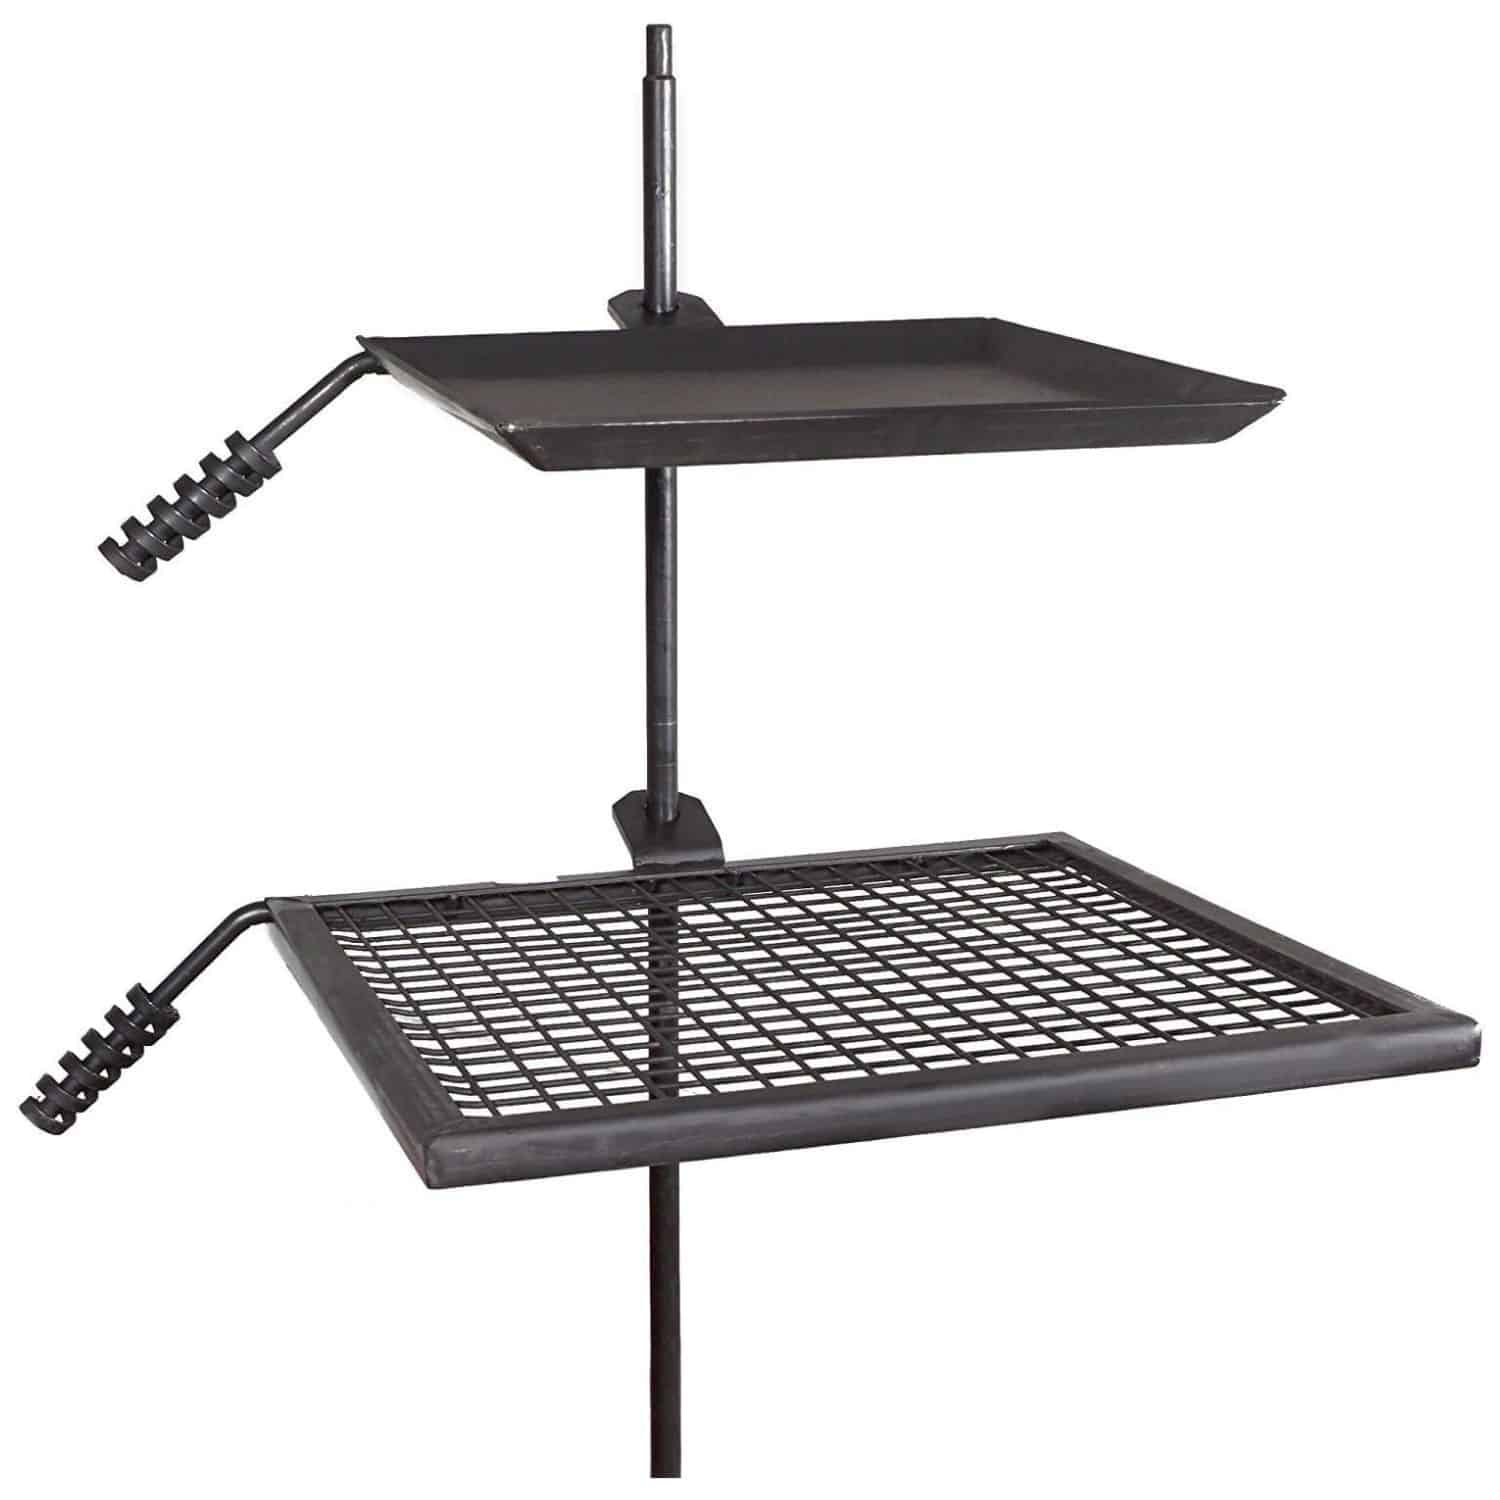 Titan Great Outdoors Adjustable Swivel Grill Fire Pit Grate + Griddle Plate